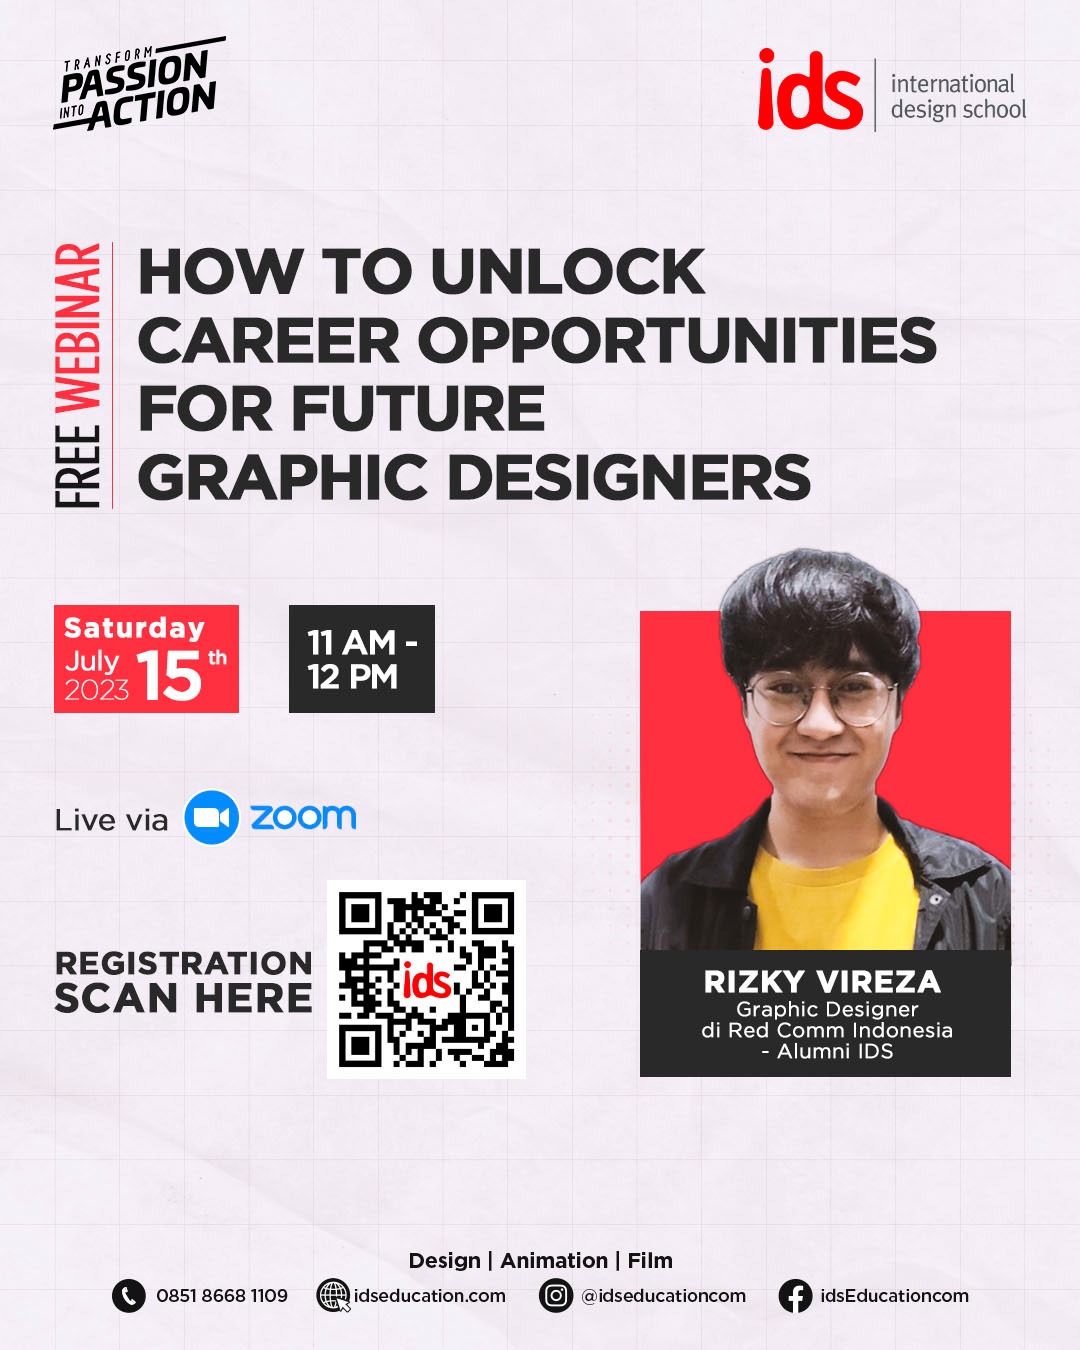 How to Unlock Career Opportunities for Future Graphic Designers